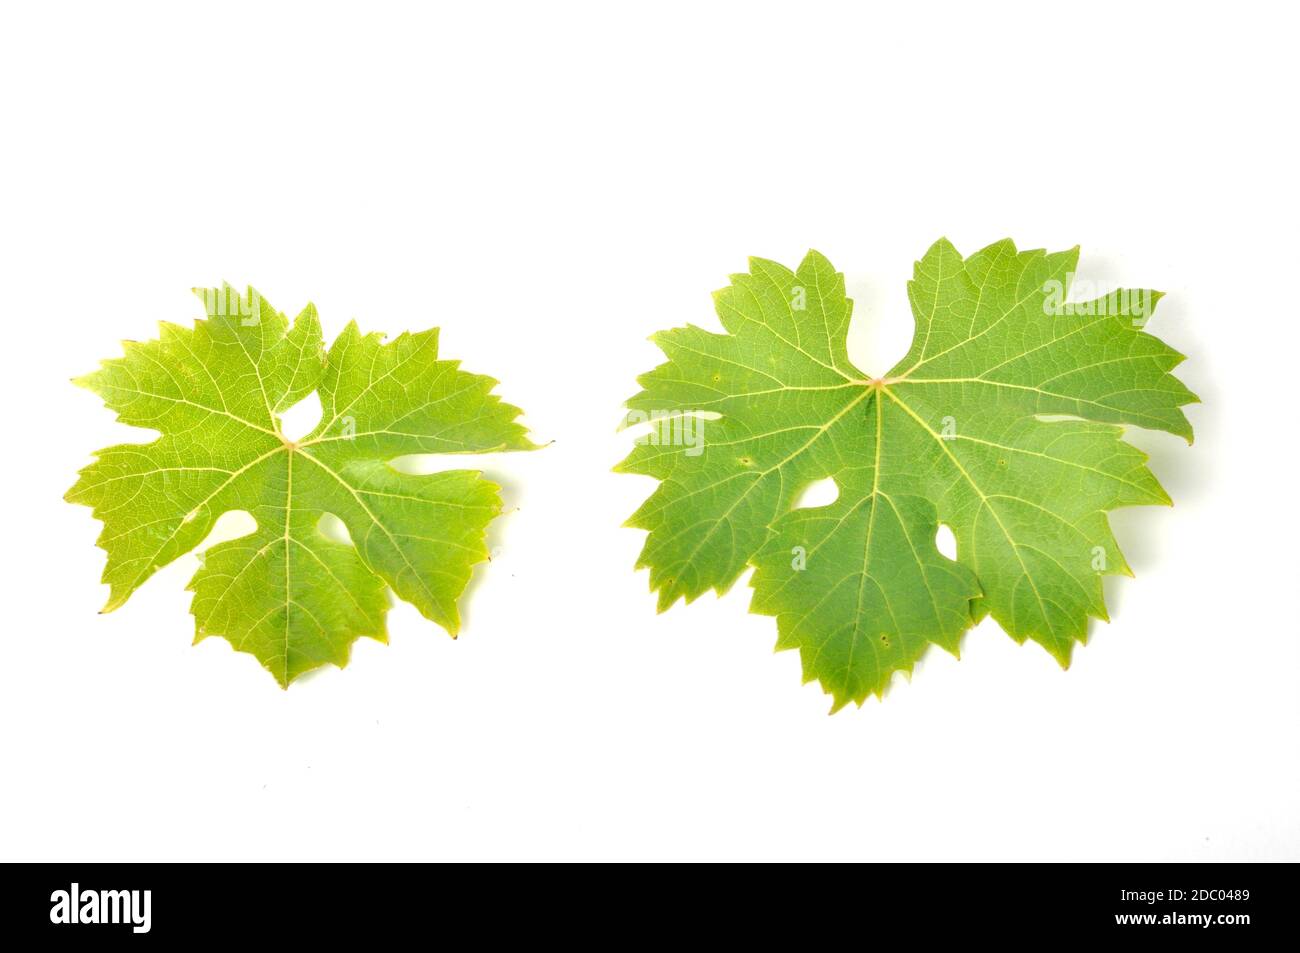 Vine leaves on a white background Stock Photo